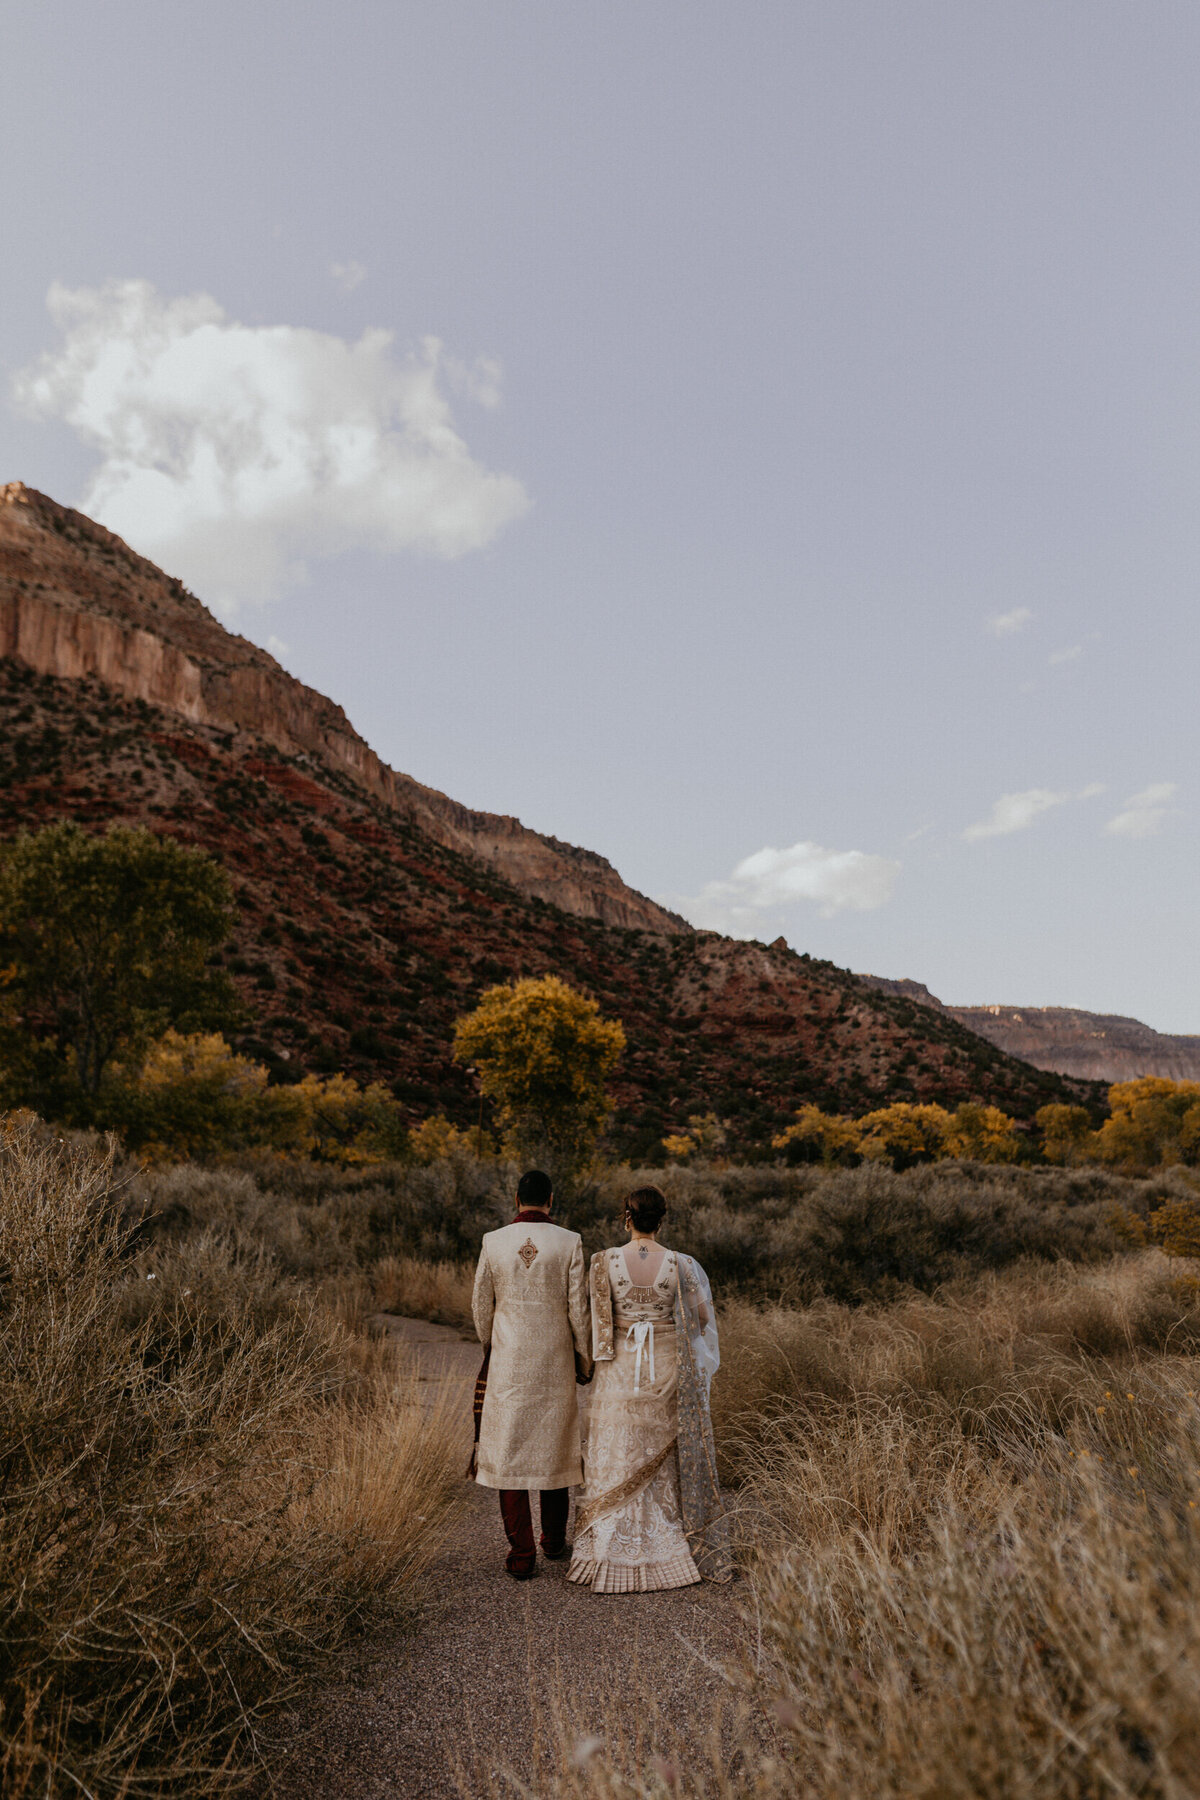 Indian newlyweds walking along the red rocks in Jemez Springs, New Mexico